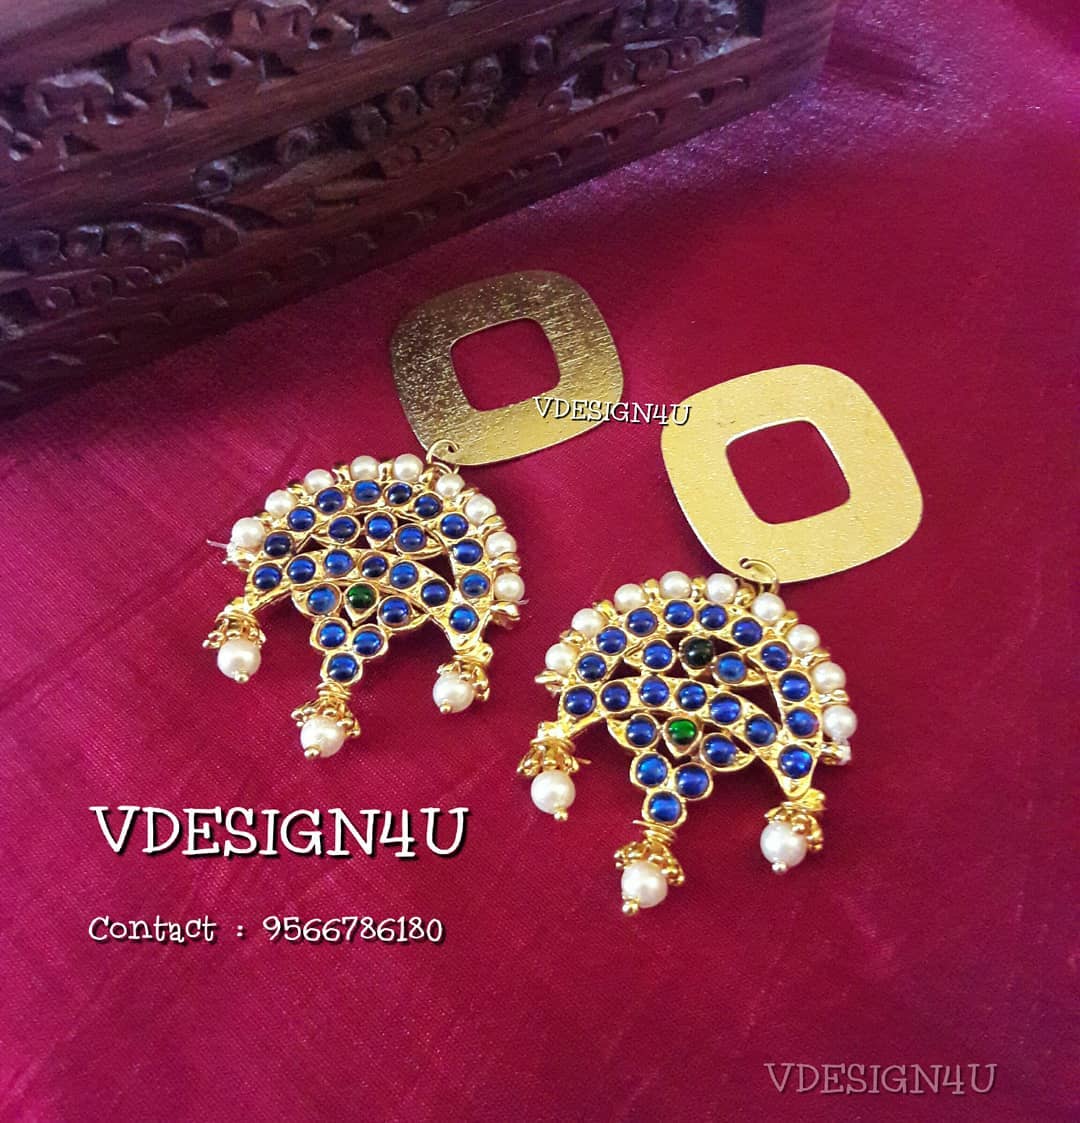 Latest Earring From Vdesign4u